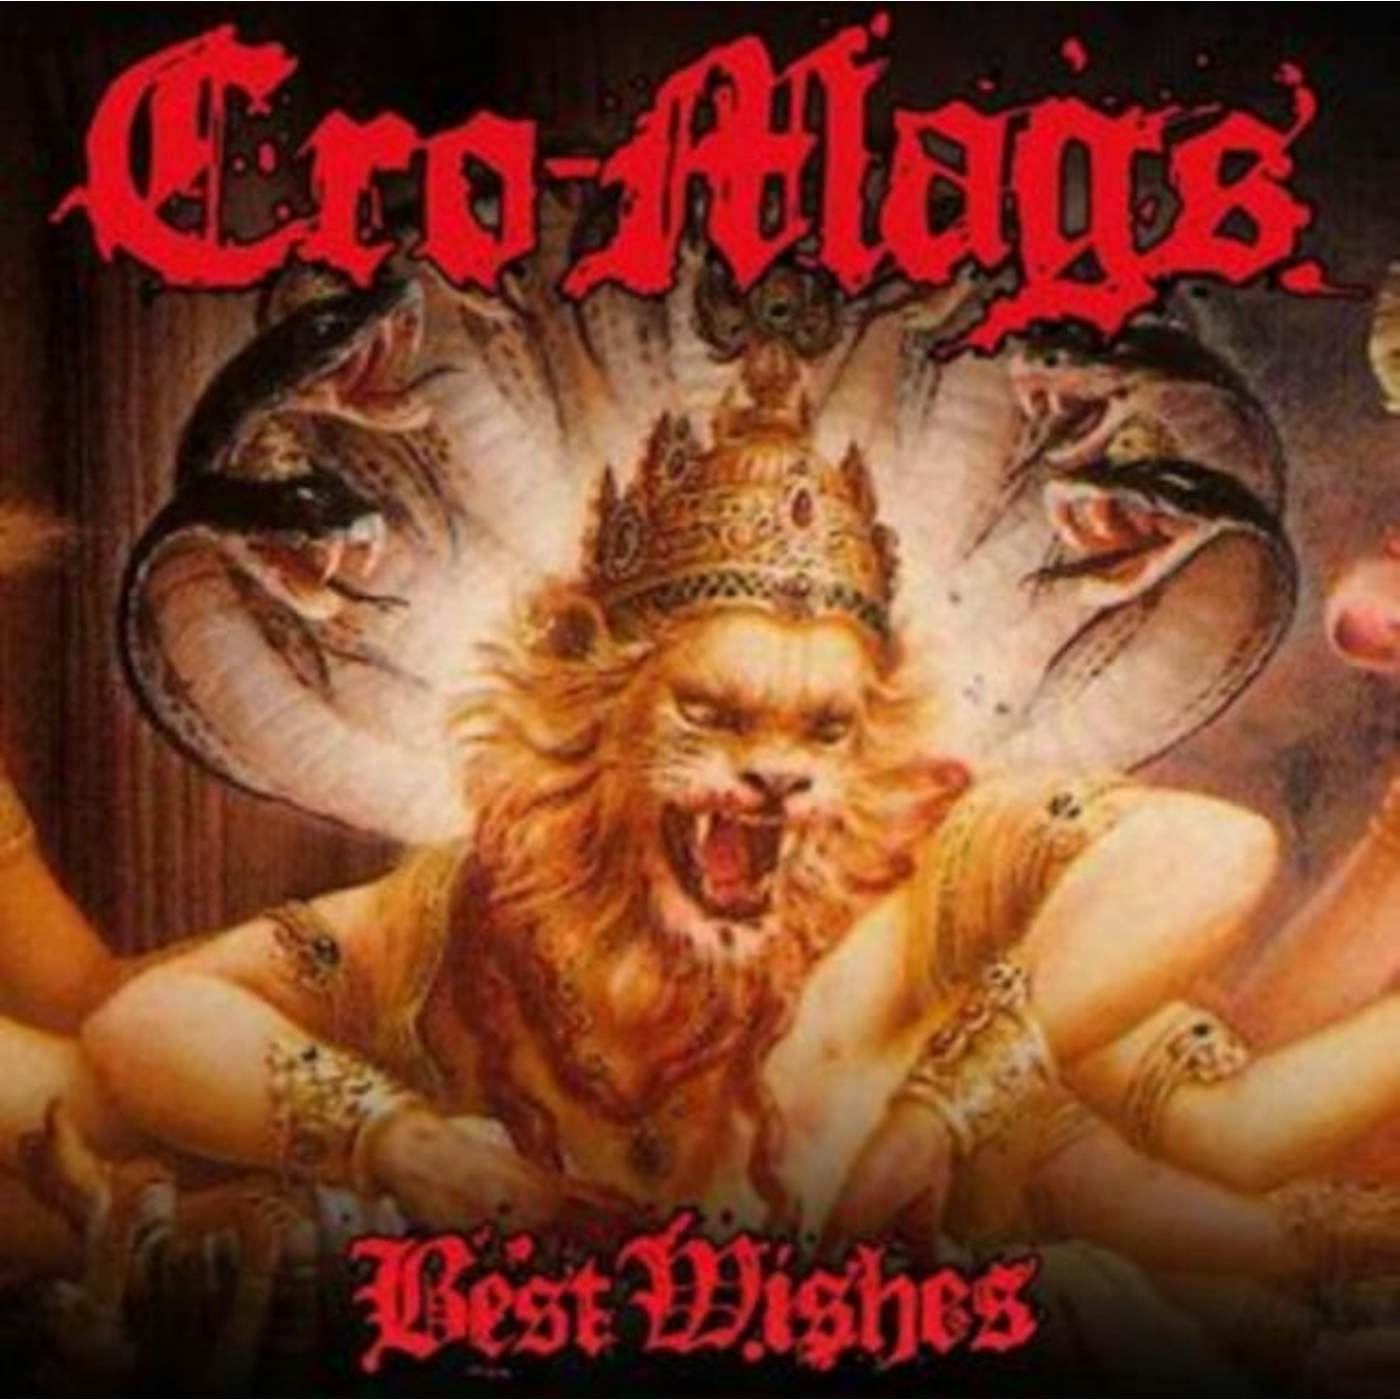 Cro-Mags LP - Best Wishes (Crystal Clear & M (Vinyl)